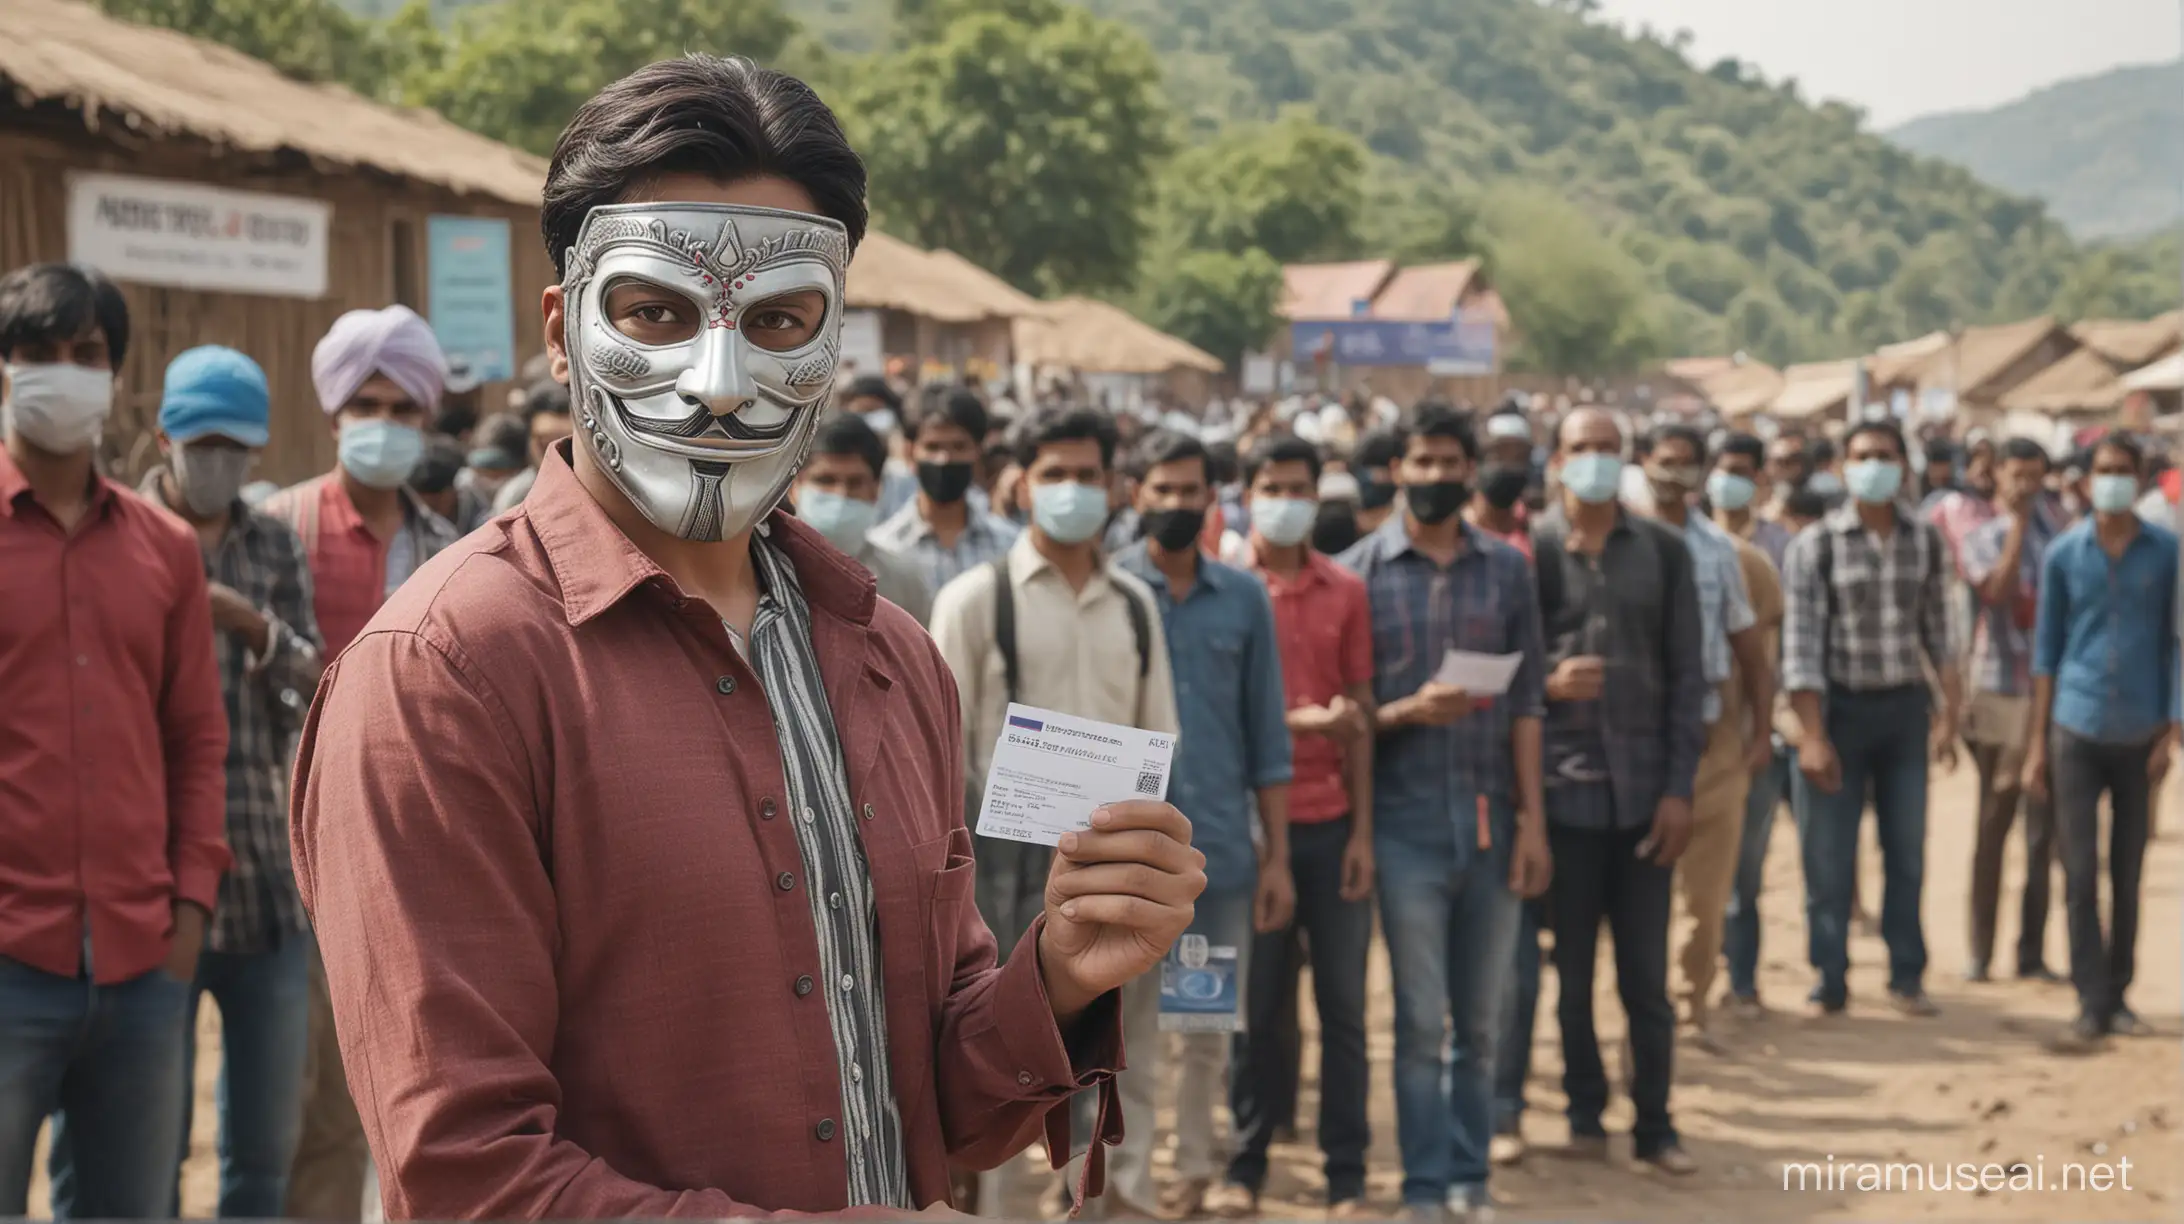 Mysterious Masked Voters in Queue with ID Cards in Indian Village